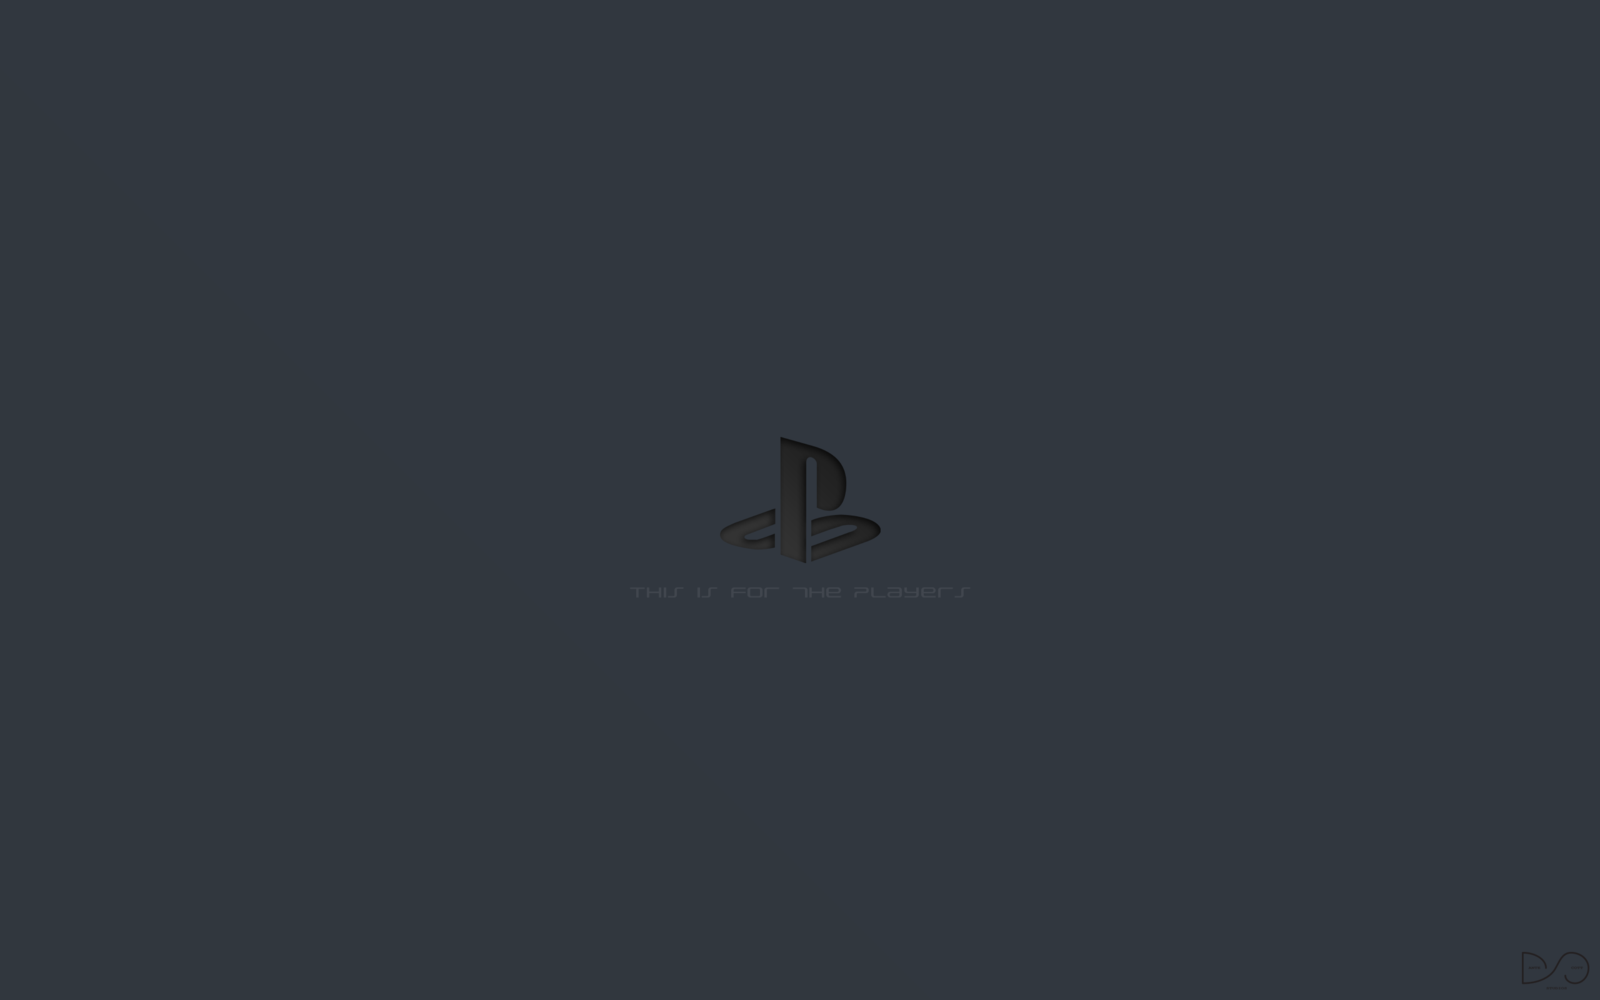 Playstation Logo Background Wallpapers Attachment 3486 - HD ...